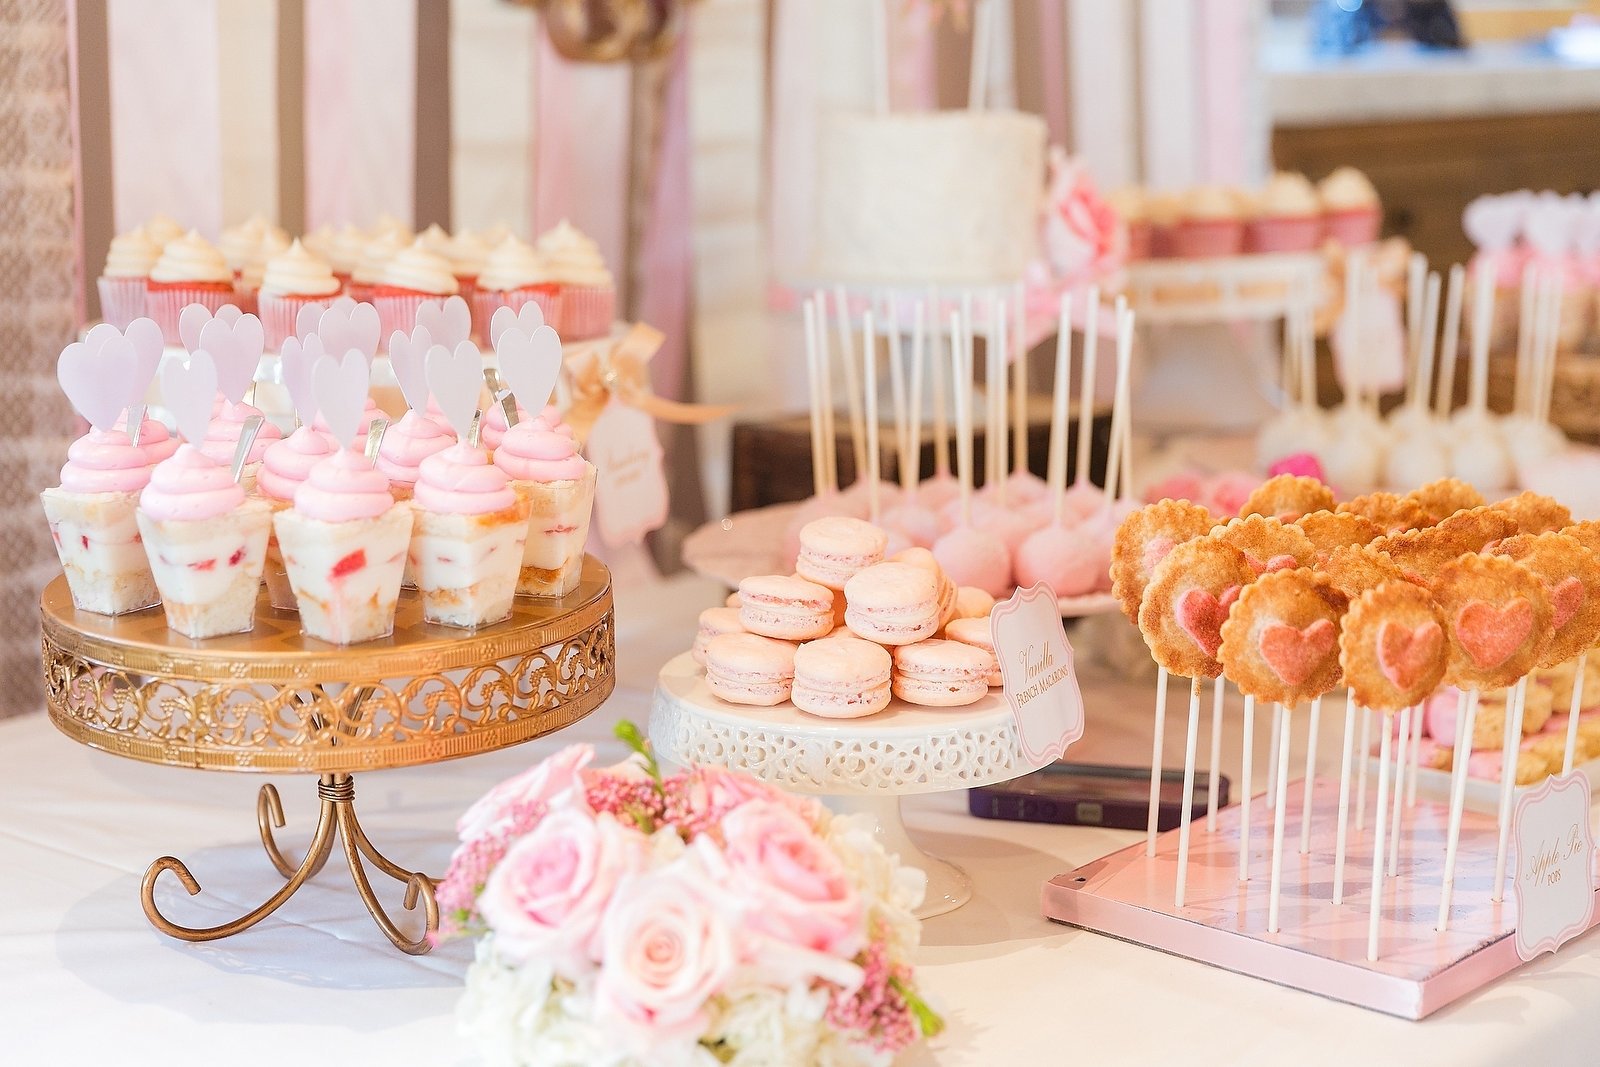 10 Stylish Candy Ideas For Baby Shower candy table ideas for baby shower formidable pink decoration 2022